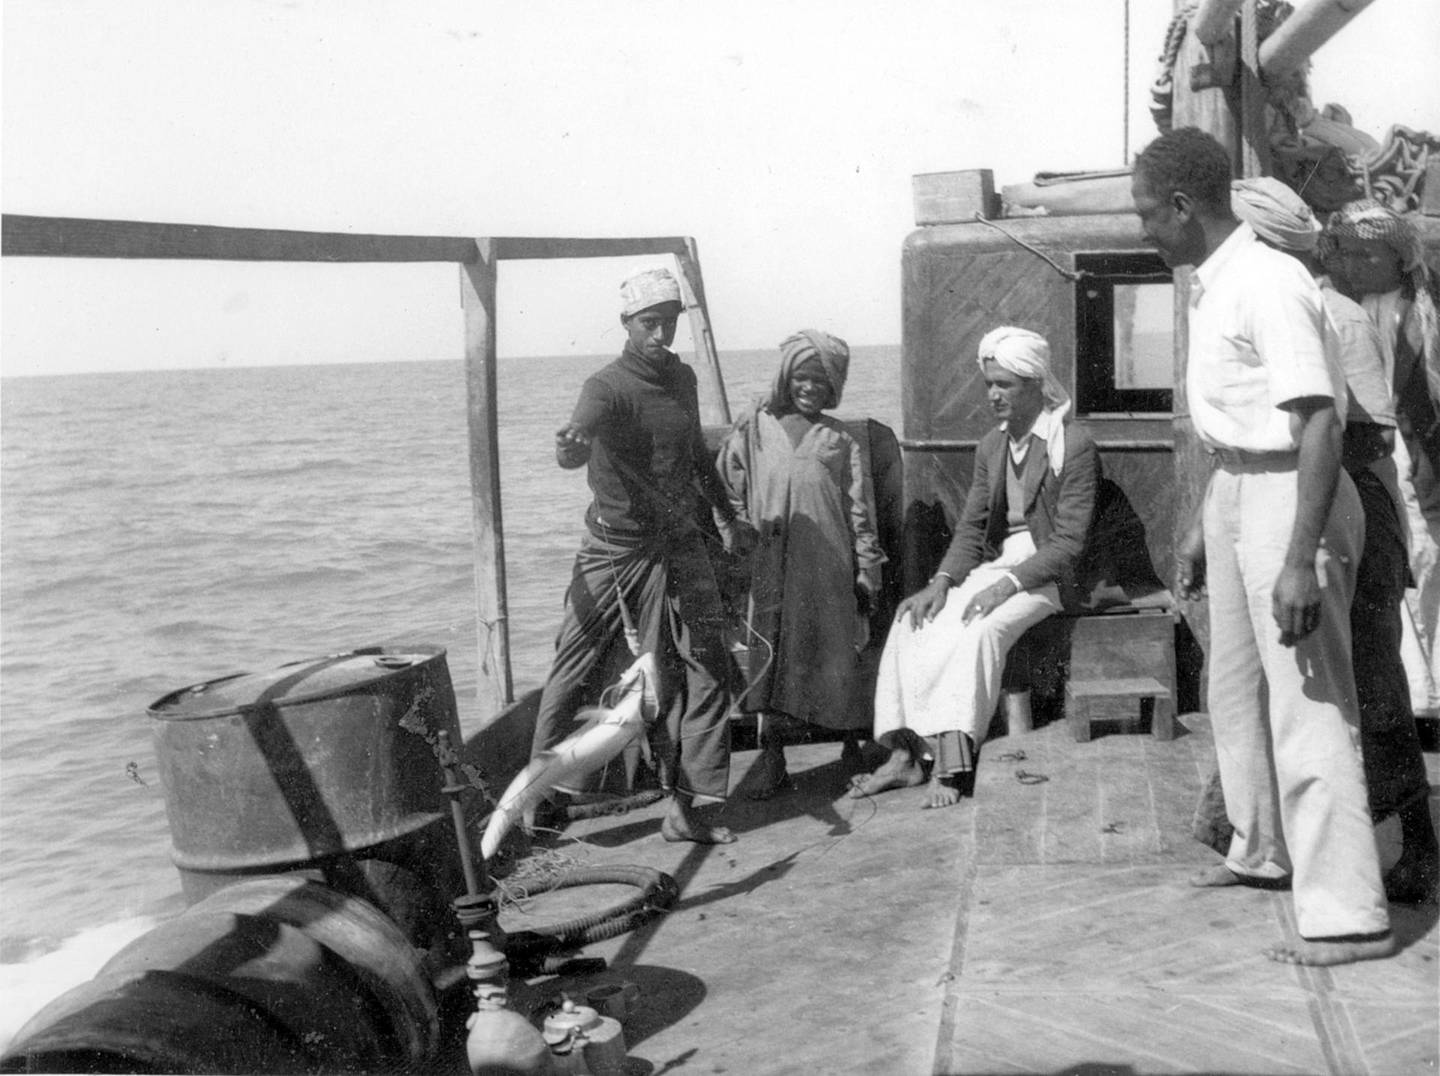 Fishing on board Faares, the wooden boat that the Hillyards used. Courtesy Susan Hillyard